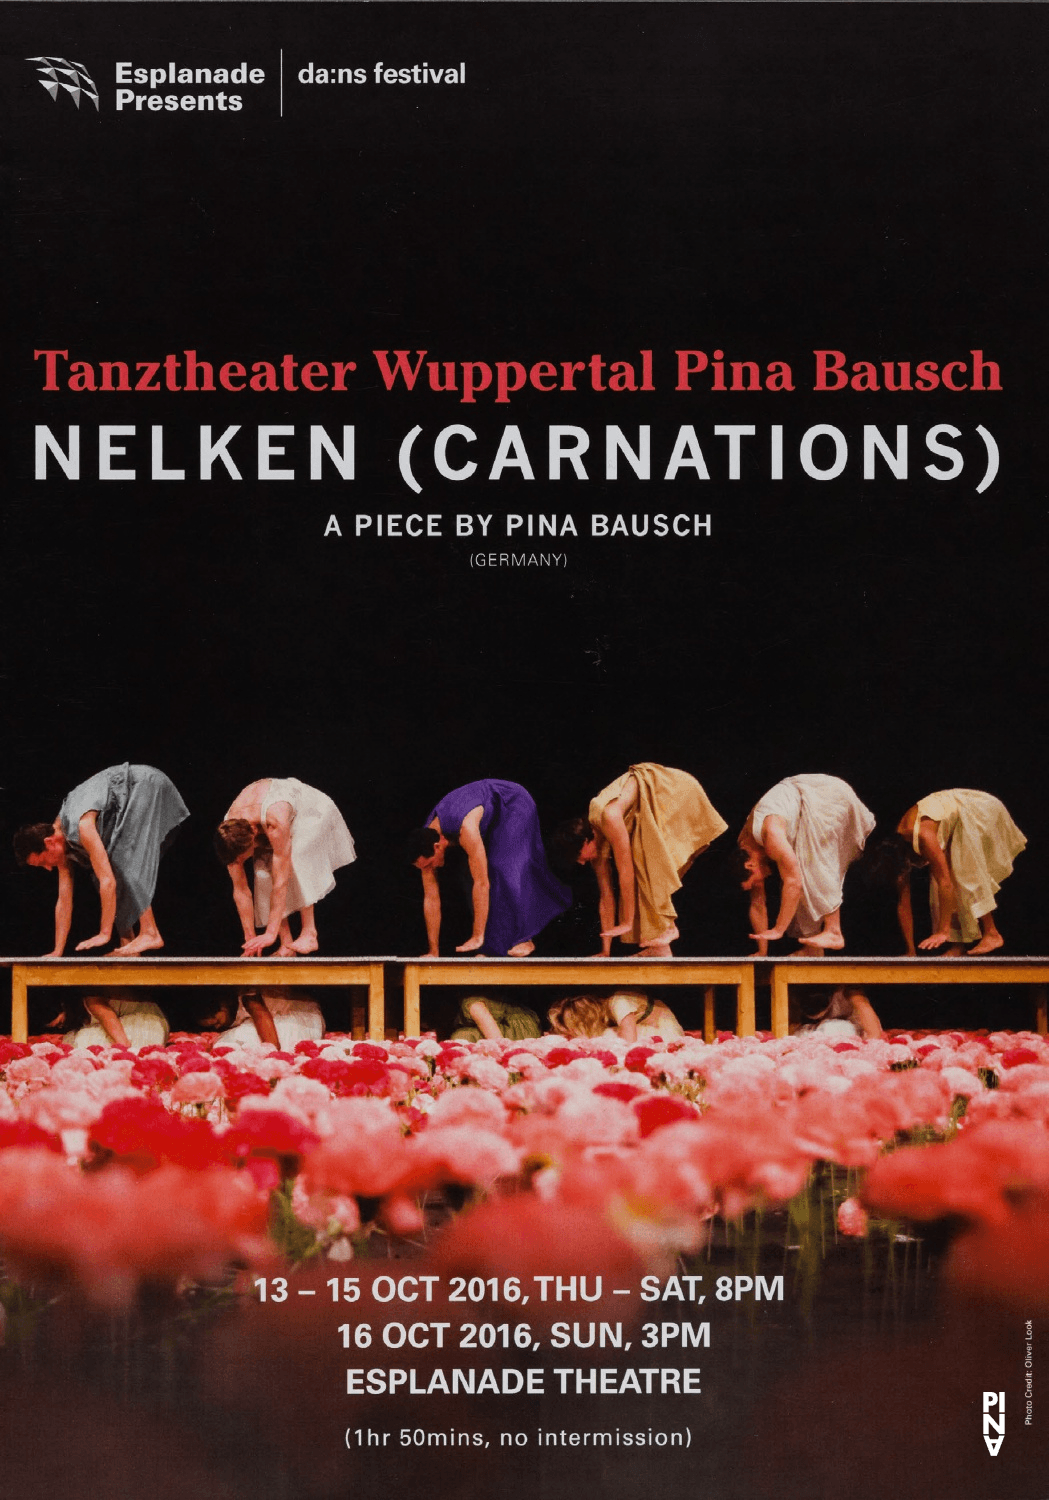 Booklet for “Nelken (Carnations)” by Pina Bausch with Tanztheater Wuppertal in in Singapore, 10/13/2016 – 10/16/2016